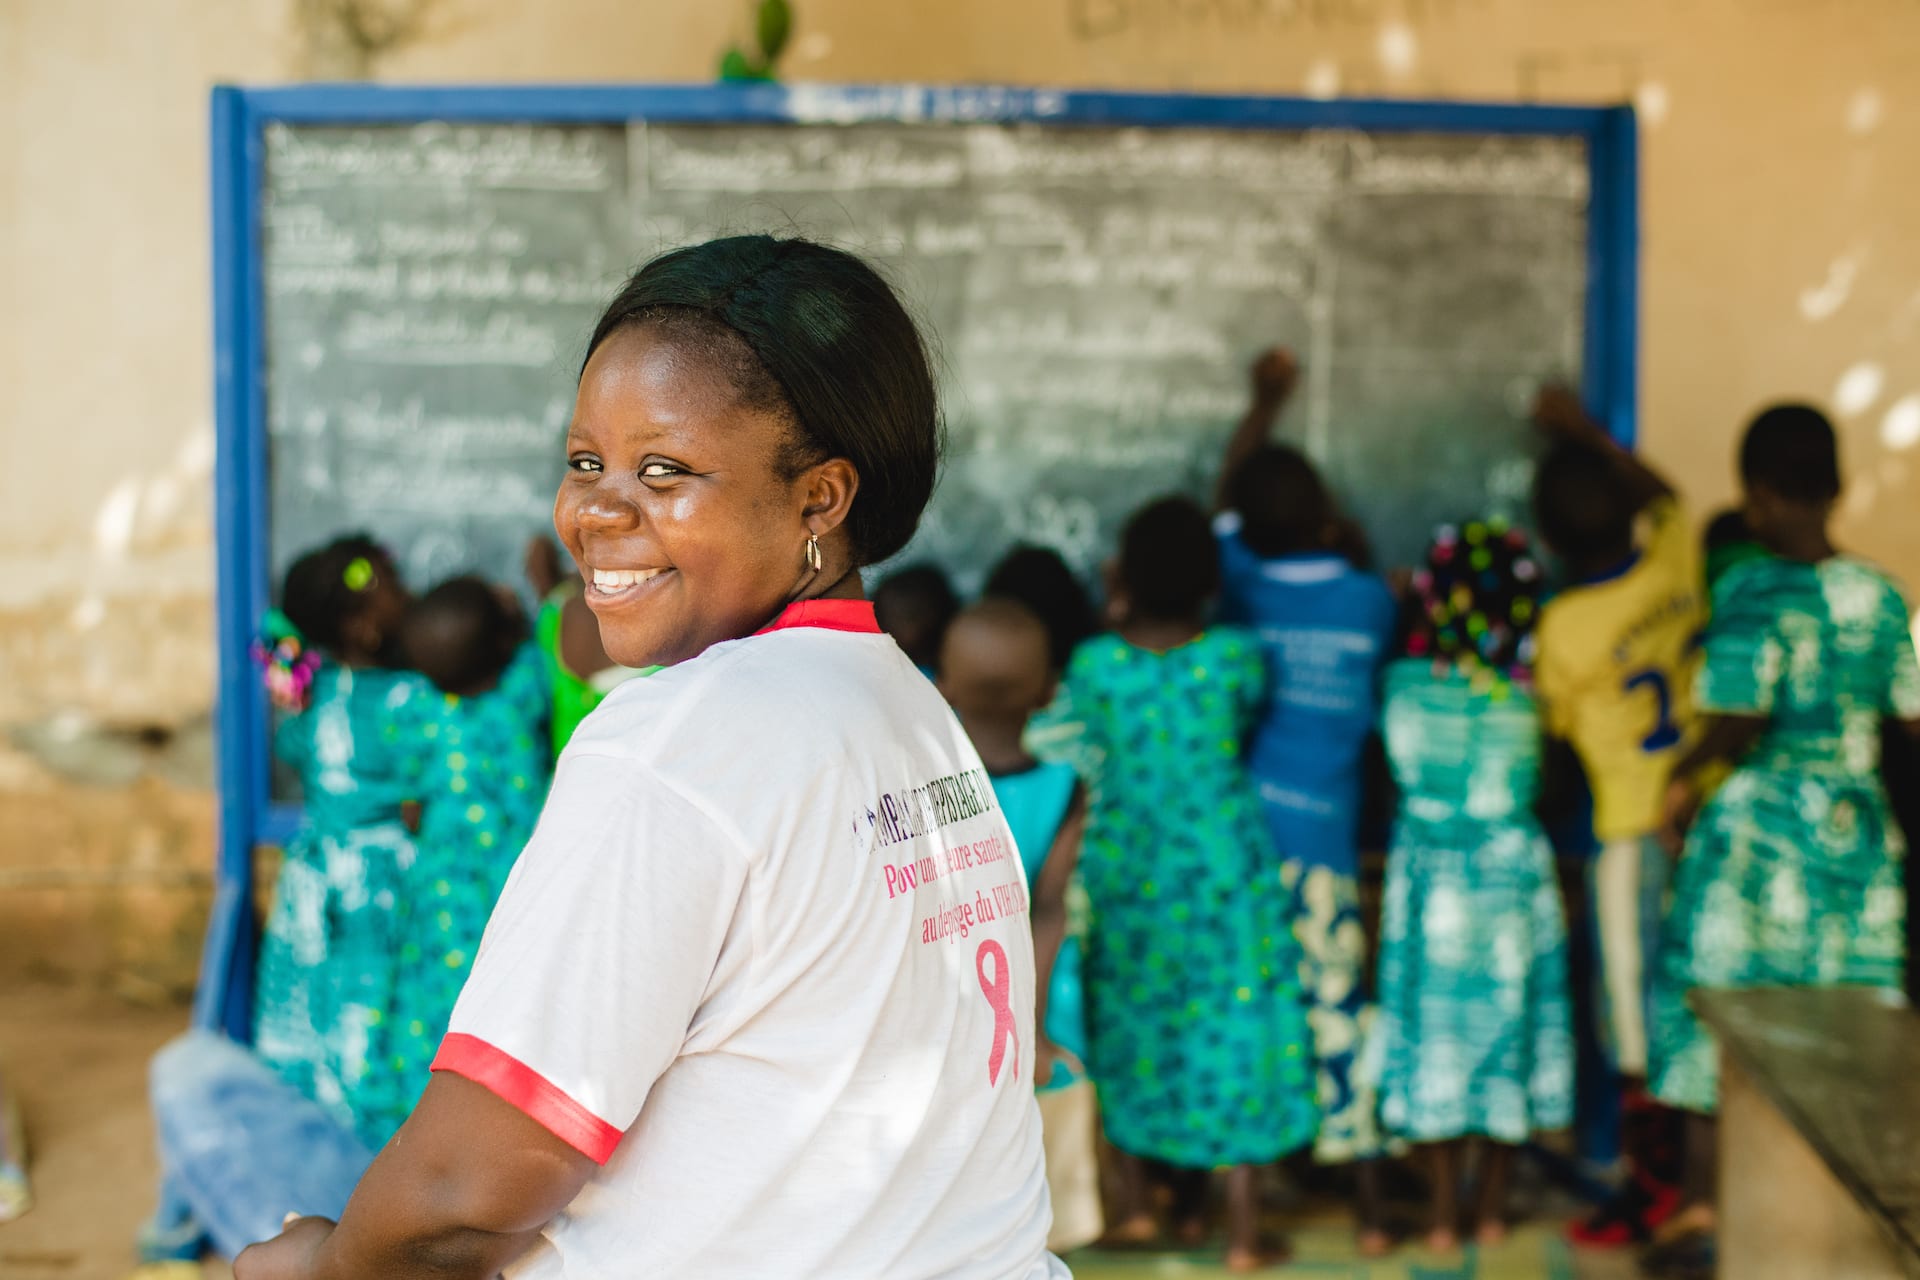 A woman in Togo sits in a classroom where children are working on a chalkboard in the background.